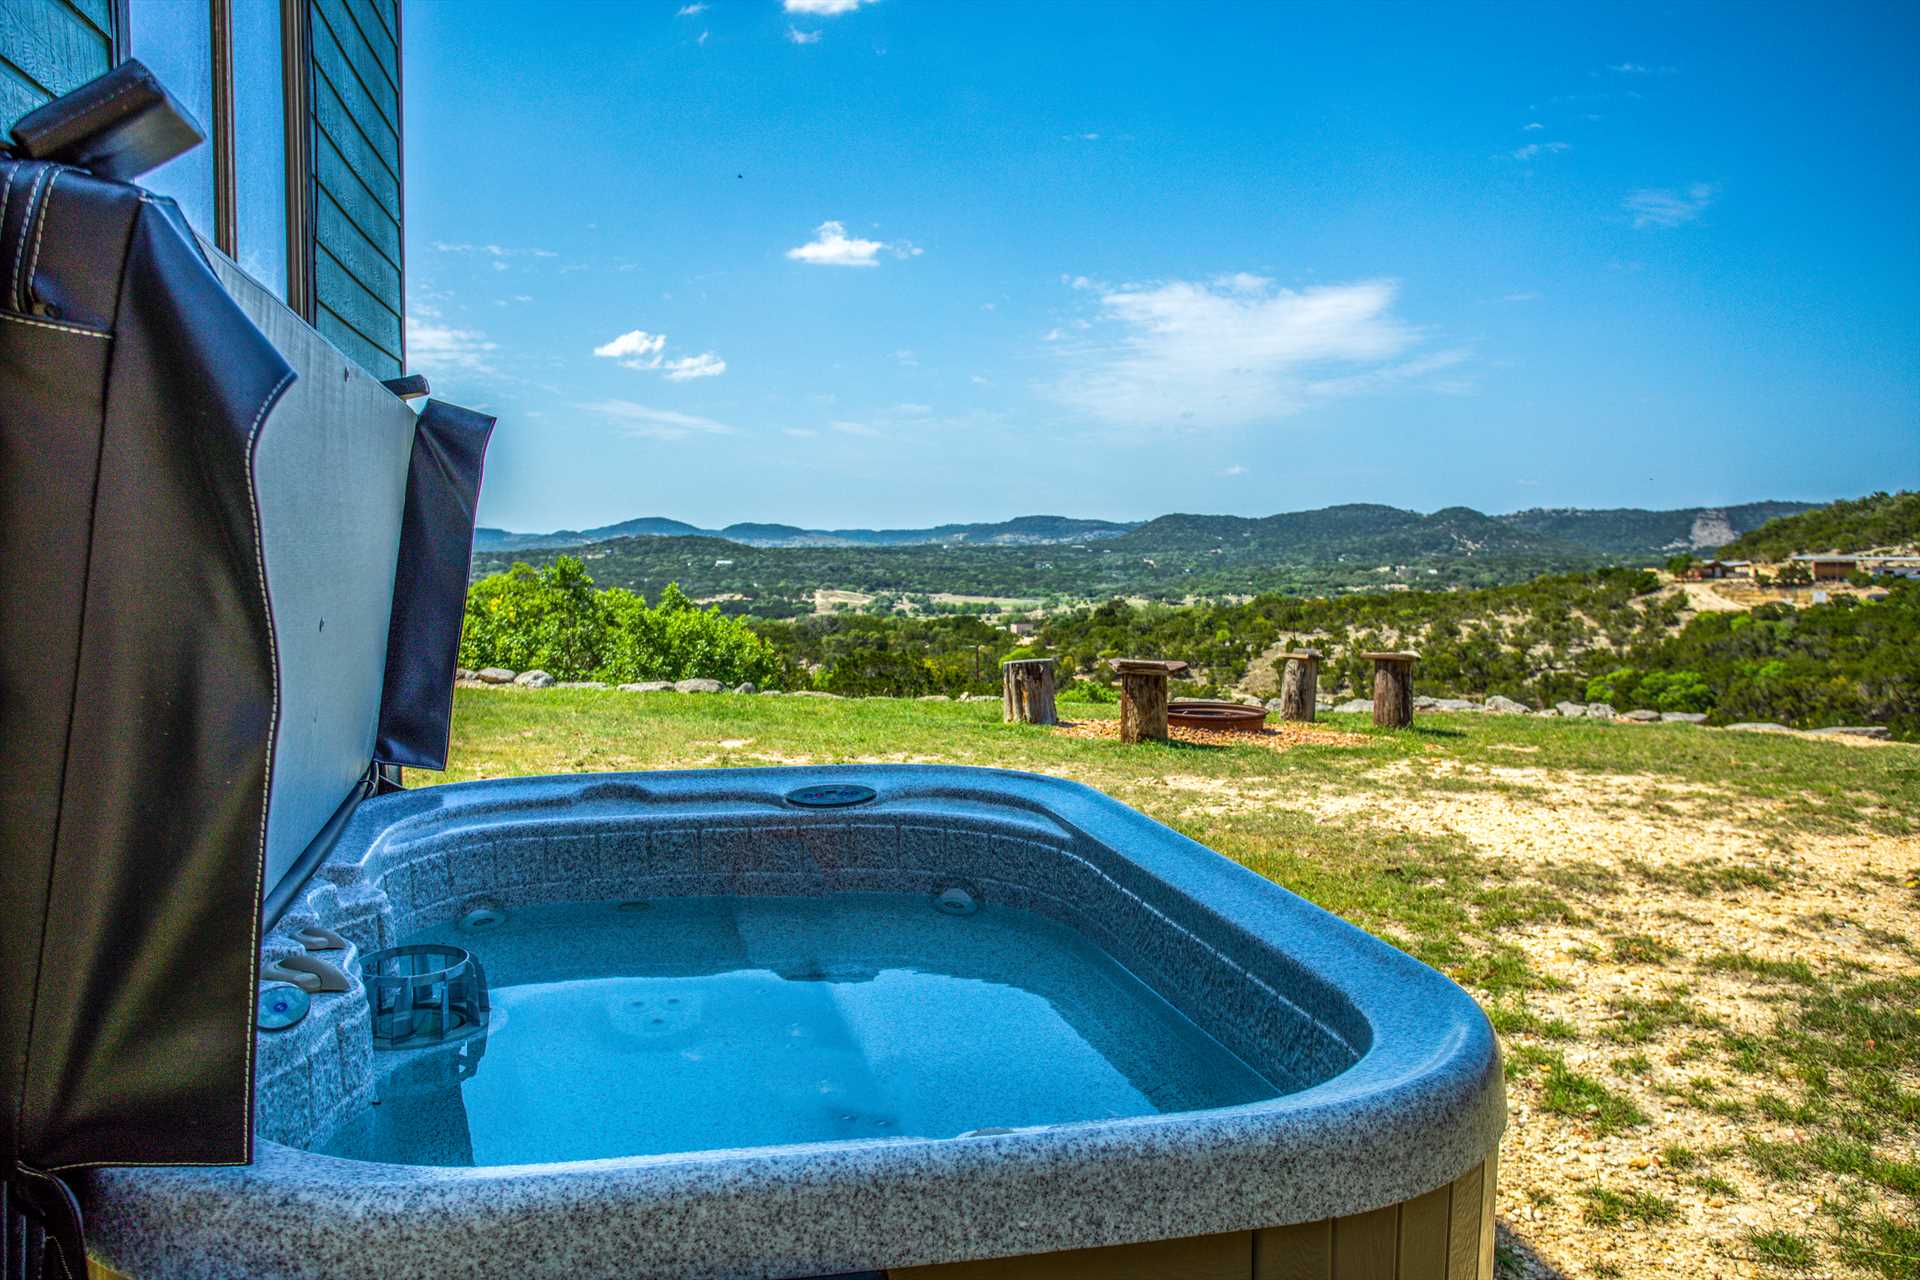                                                 Not only is there a warm and soothing hot tub here, but it's got one of the most amazing views in the Hill Country!